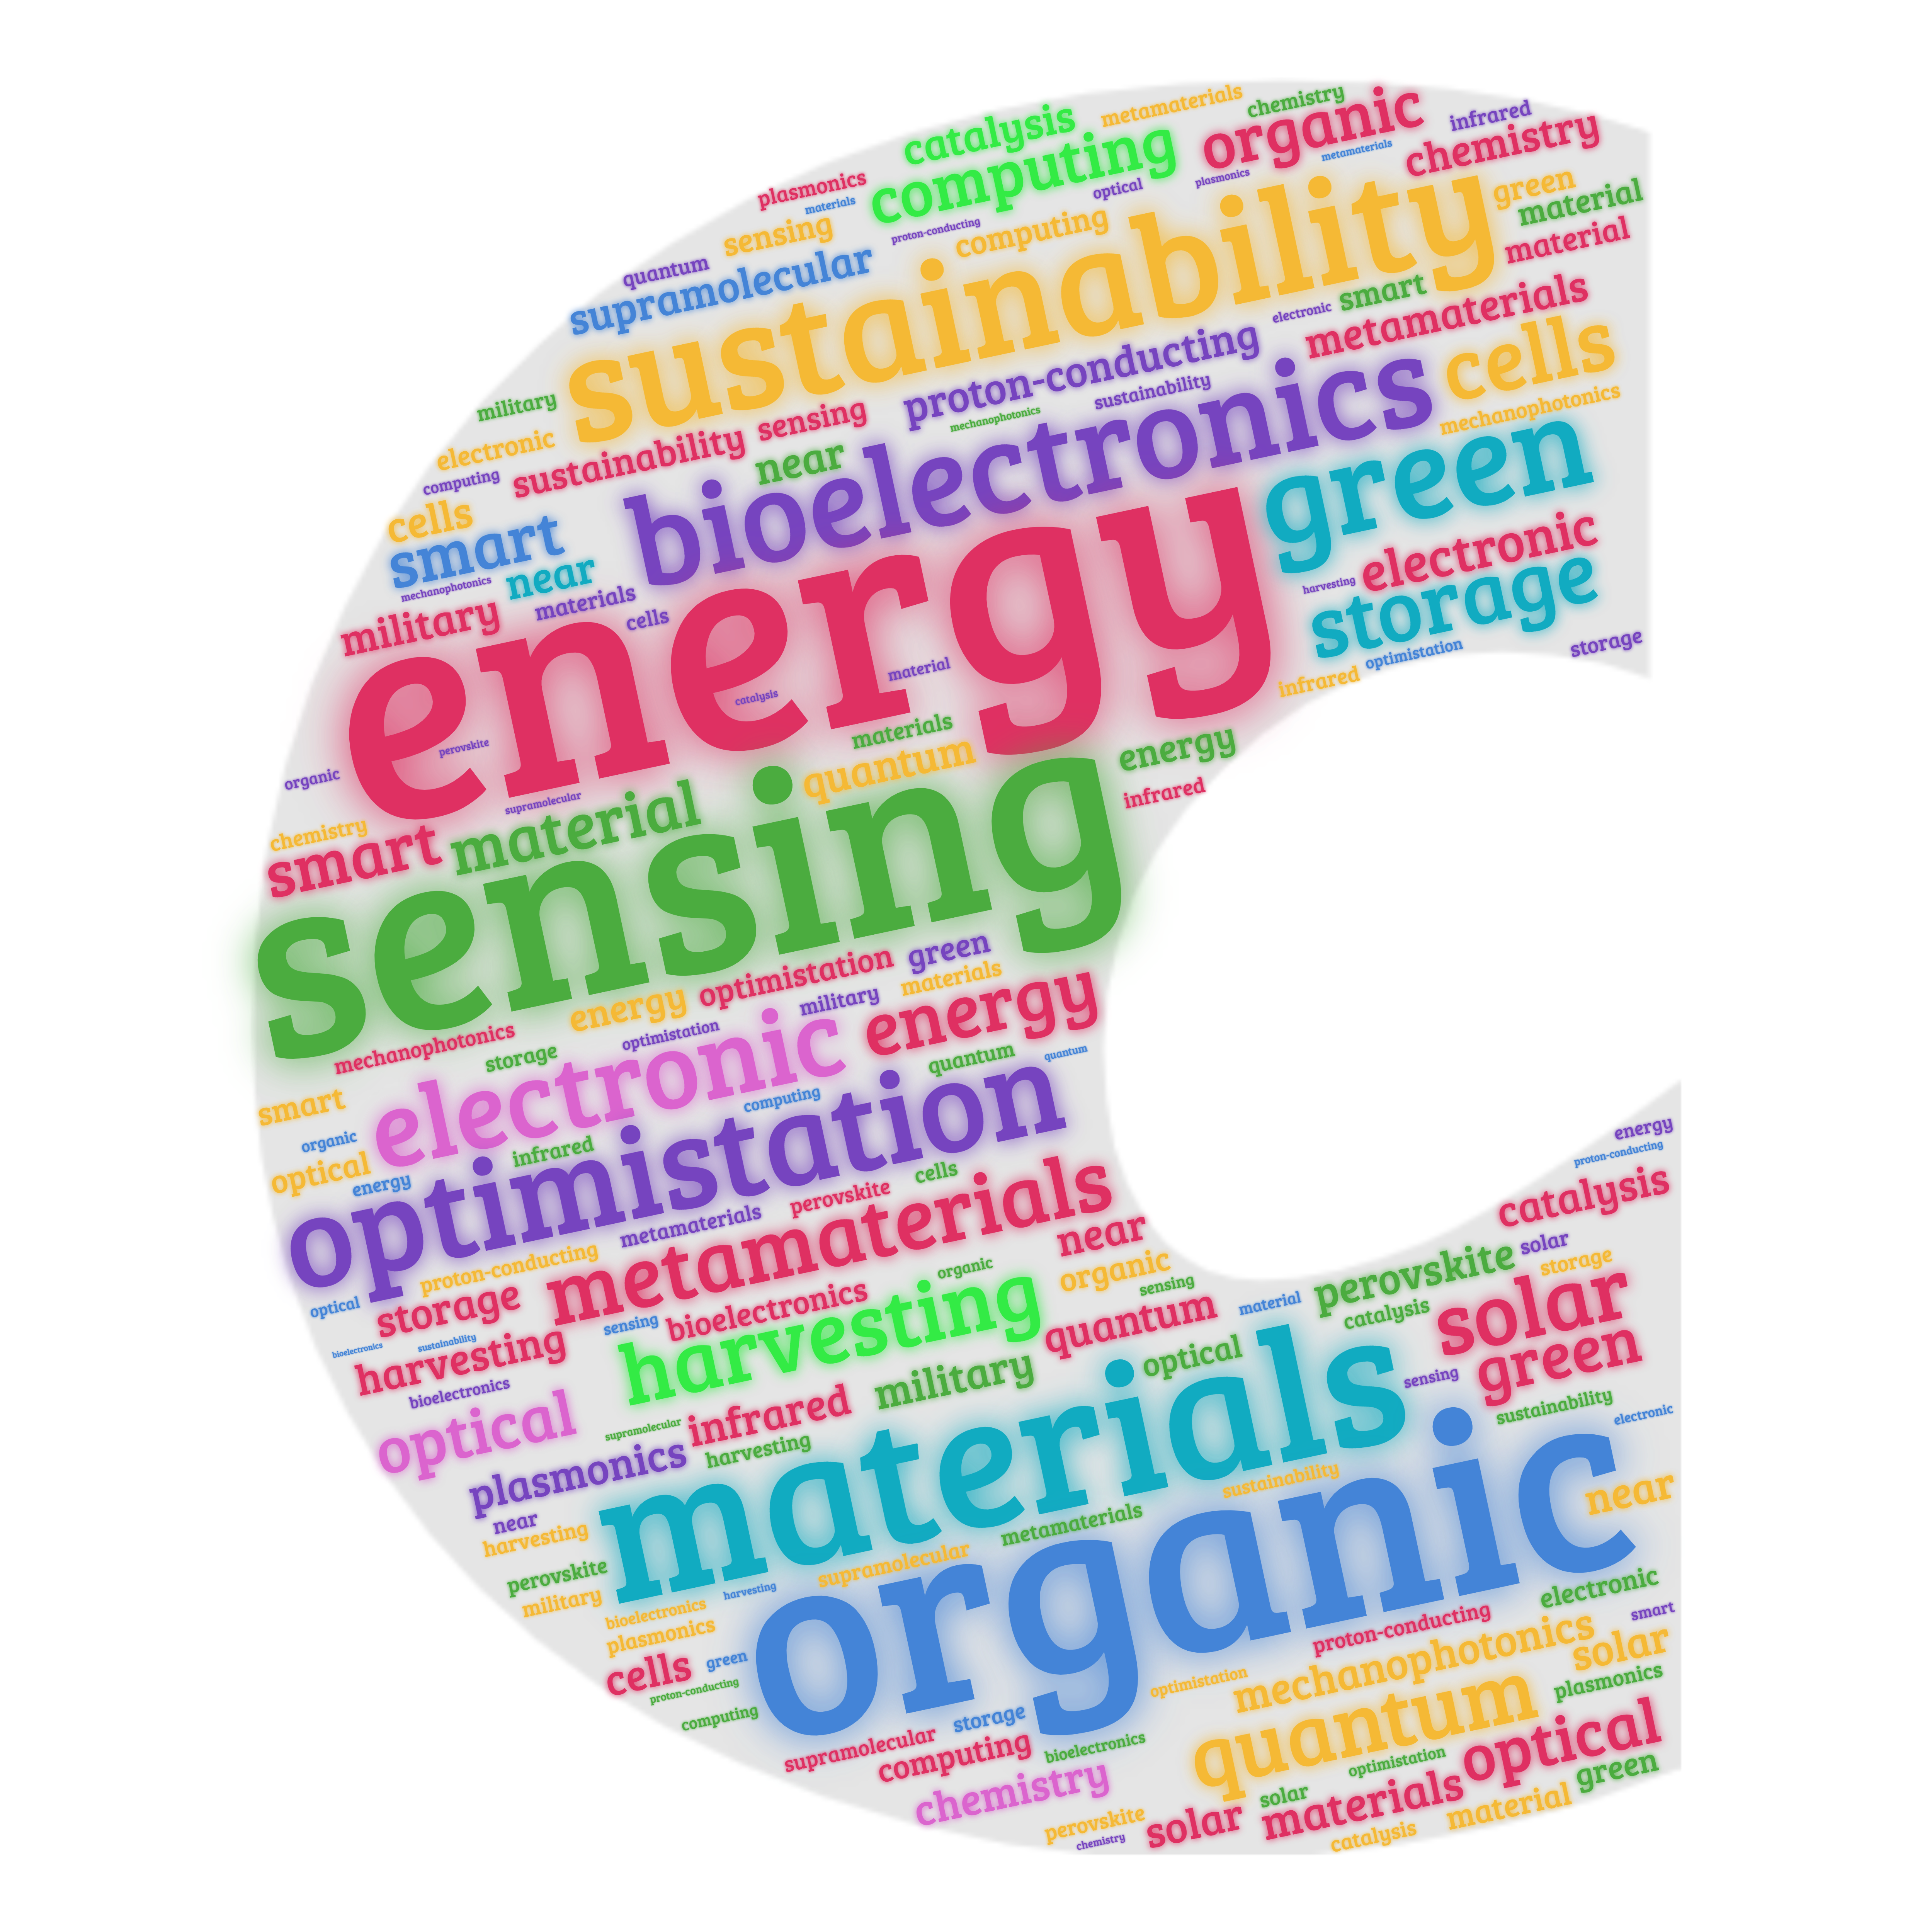 The letter 'C' filled with words from survey responses in different colours. Energy, Sensing, Organic, Materials, Optimisation, Sustainability, Bioelectronics, Green.